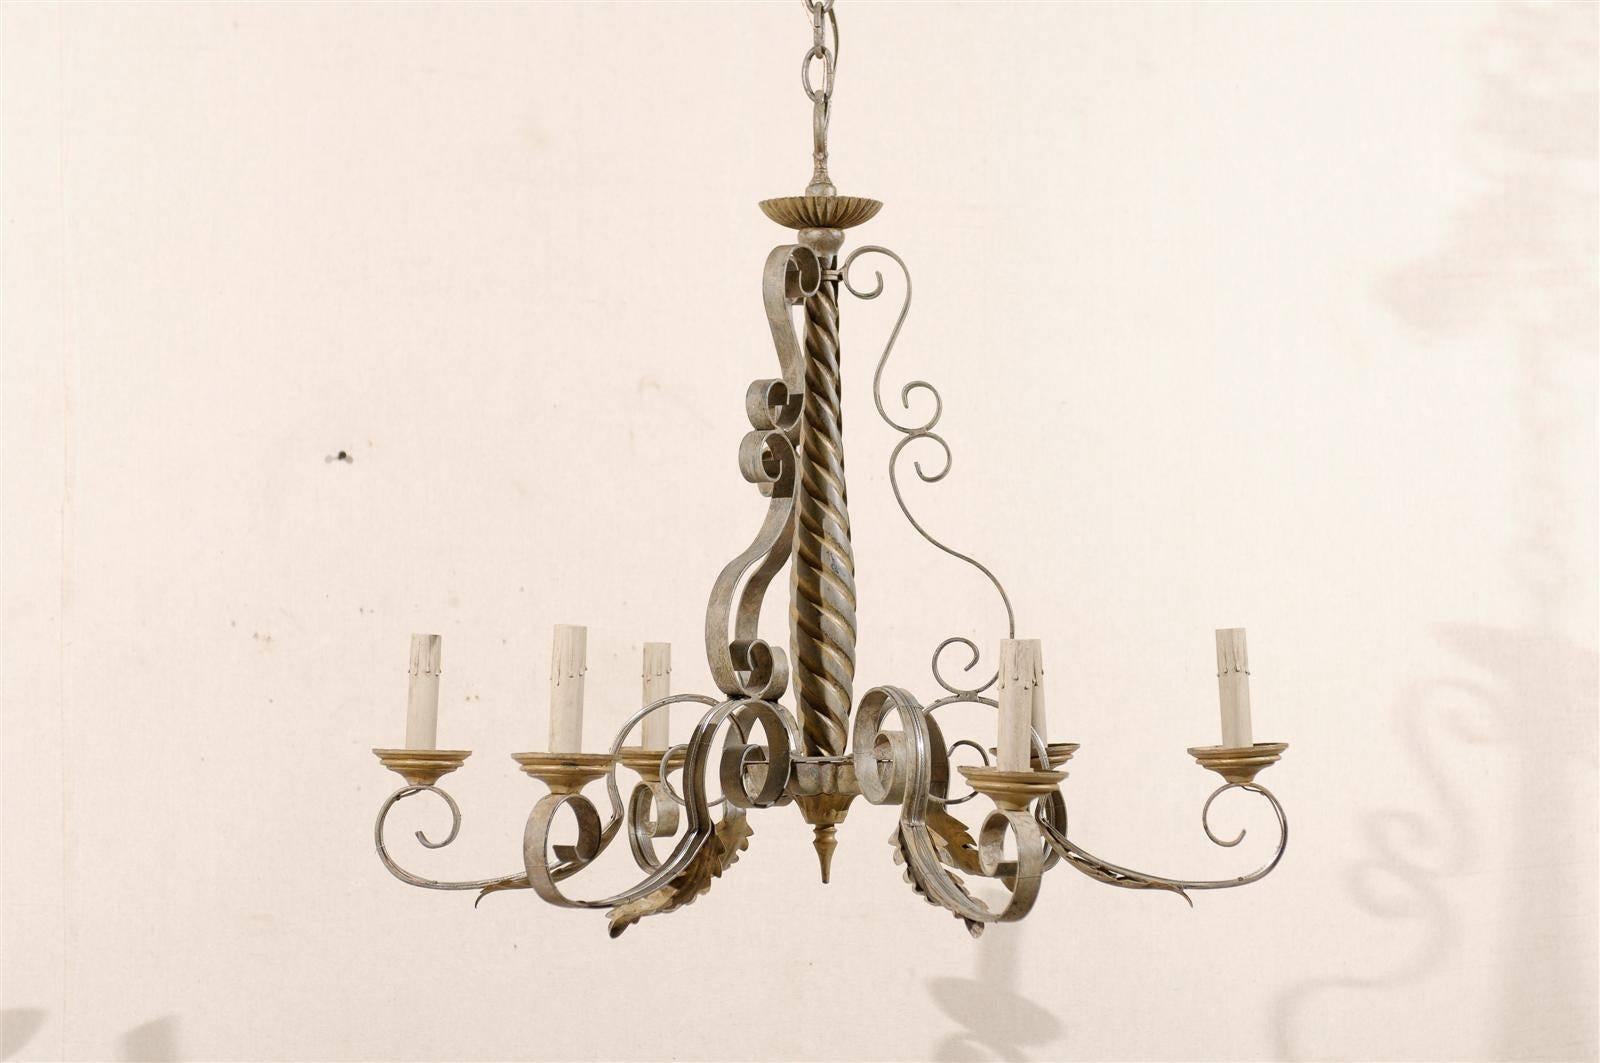 A French six-light vintage painted metal and wood chandelier with S-scroll arms, acanthus leaves along the arms and twisted central column from the mid-20th century.

This vintage French chandelier has been rewired for the US market and comes with